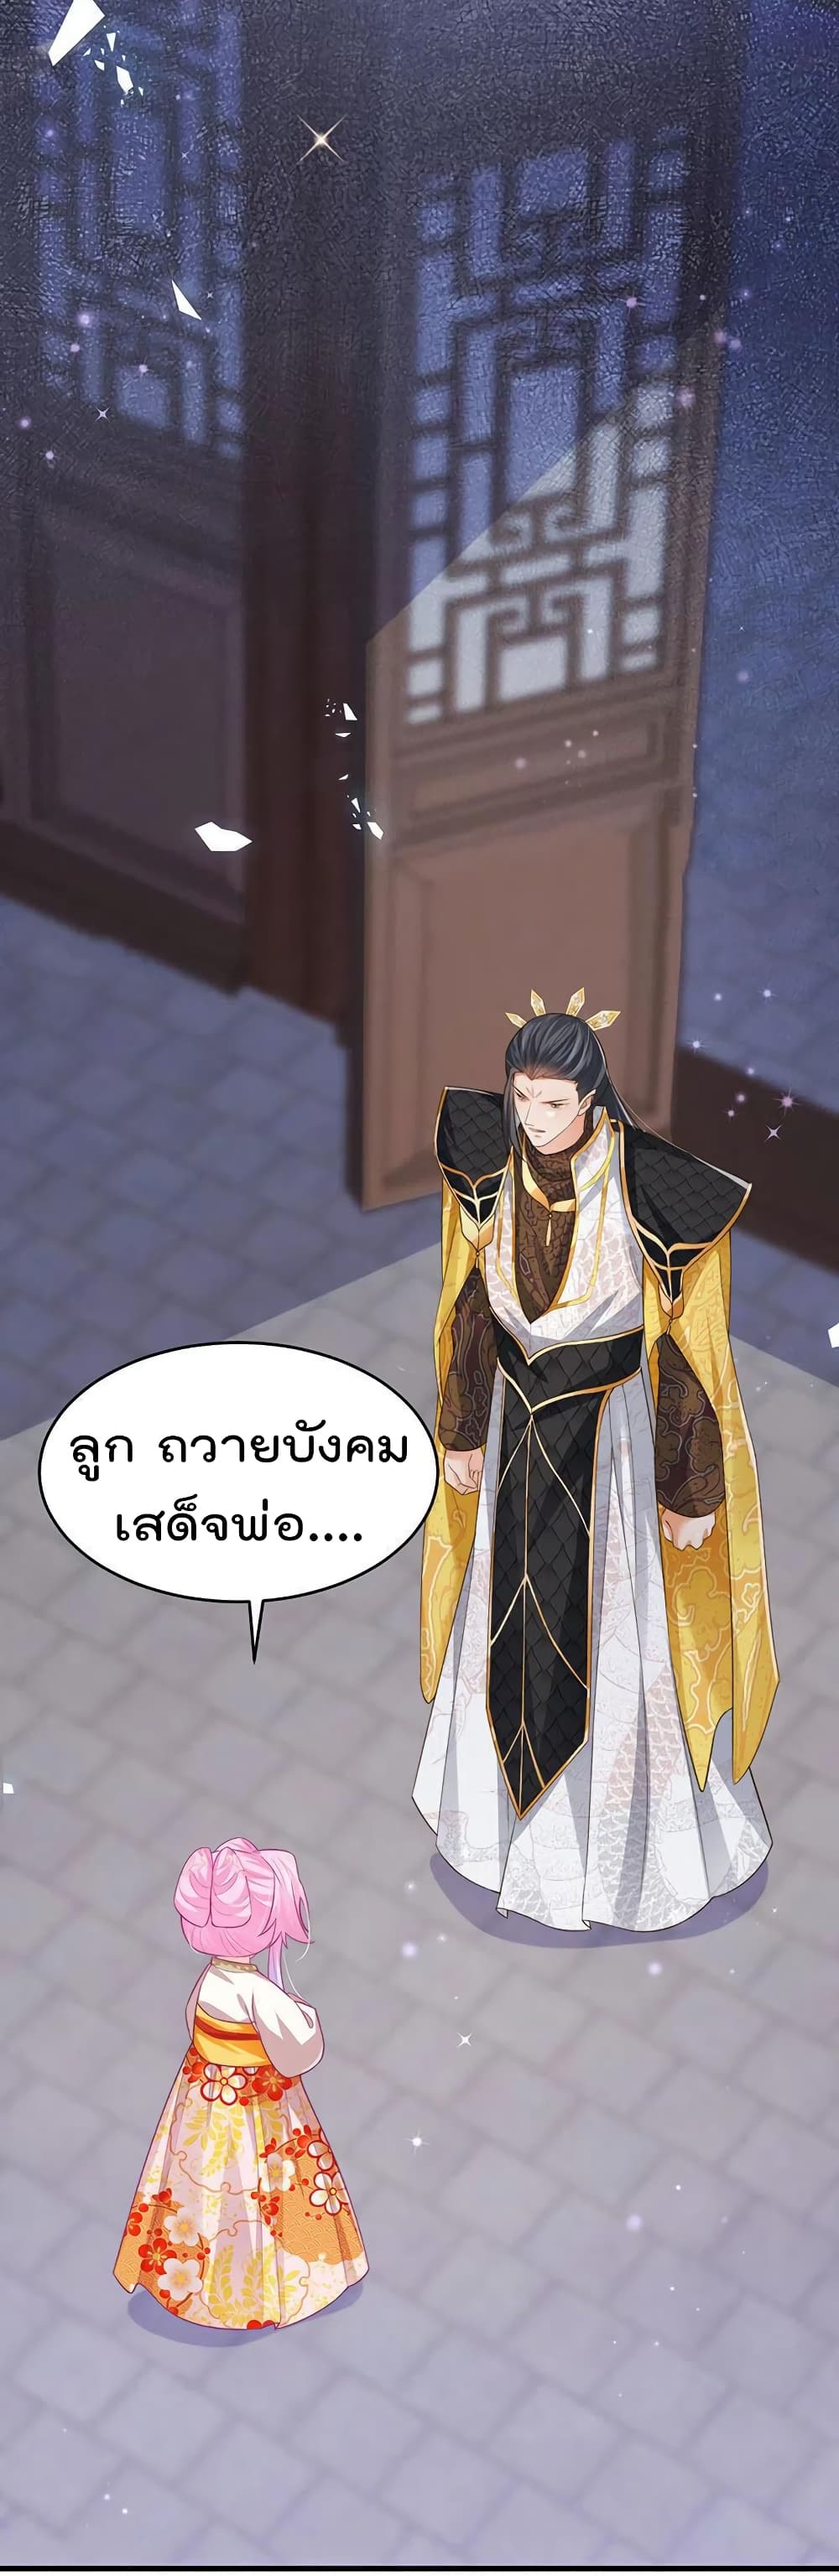 One Hundred Ways to Abuse Scum ตอนที่ 58 (4)